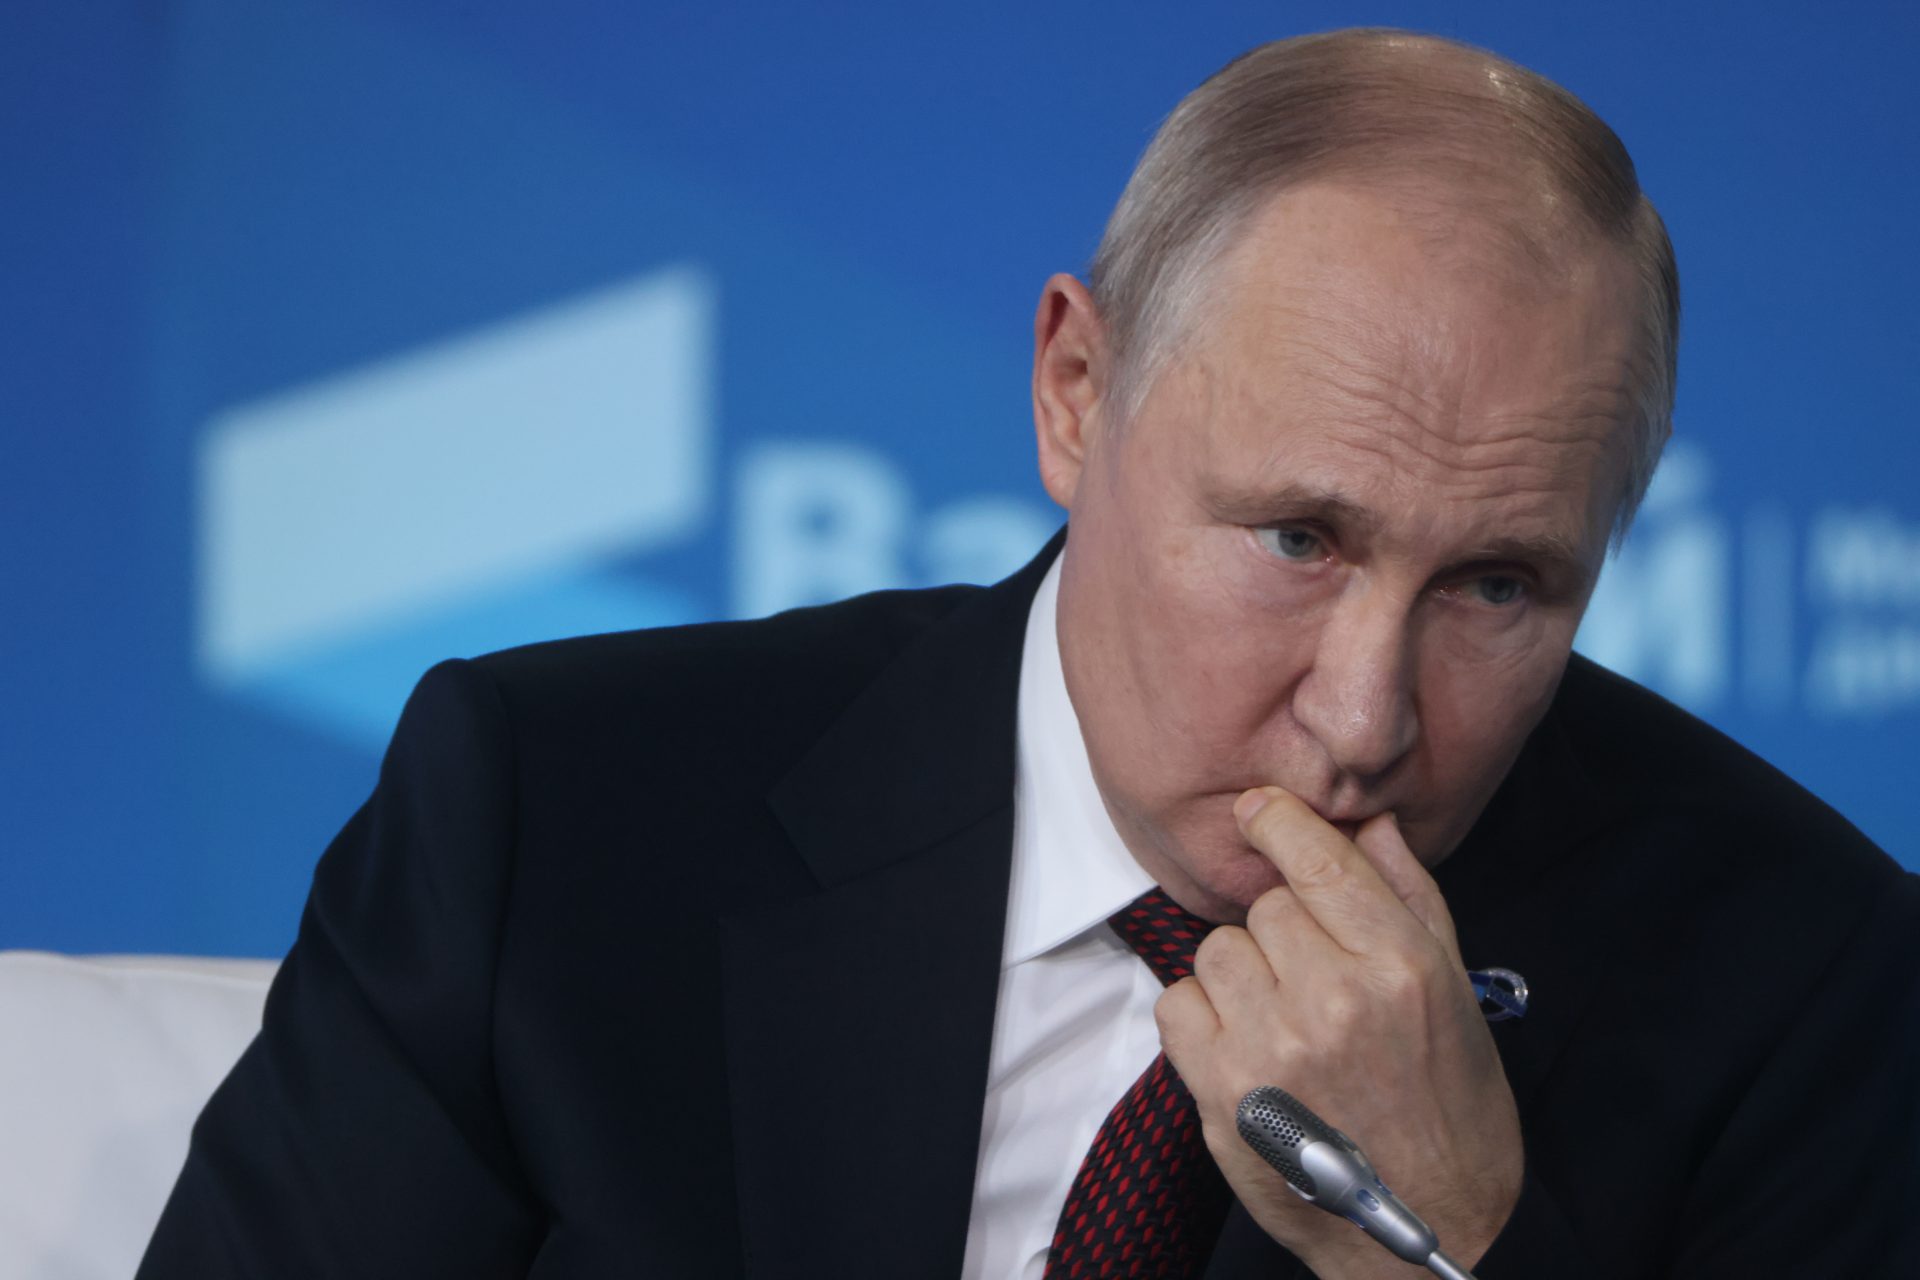 Israel is giving Putin a masterclass on how to mobilize a military force